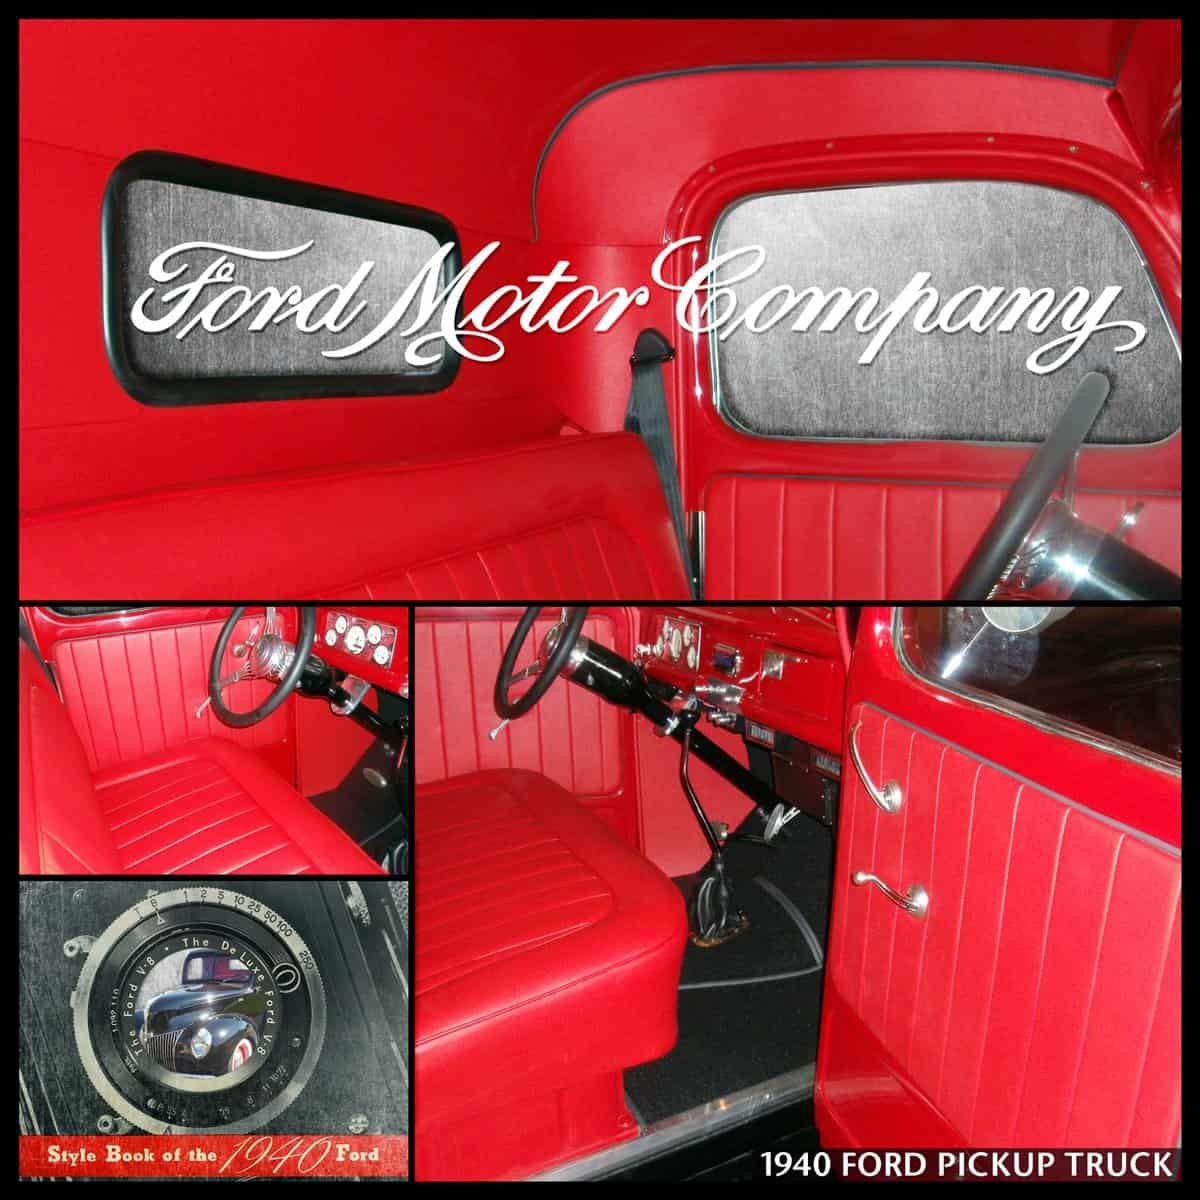 Automobile Upholstery Restoration / Automotive Fabric Repair - 1940 Ford Pickup Truck